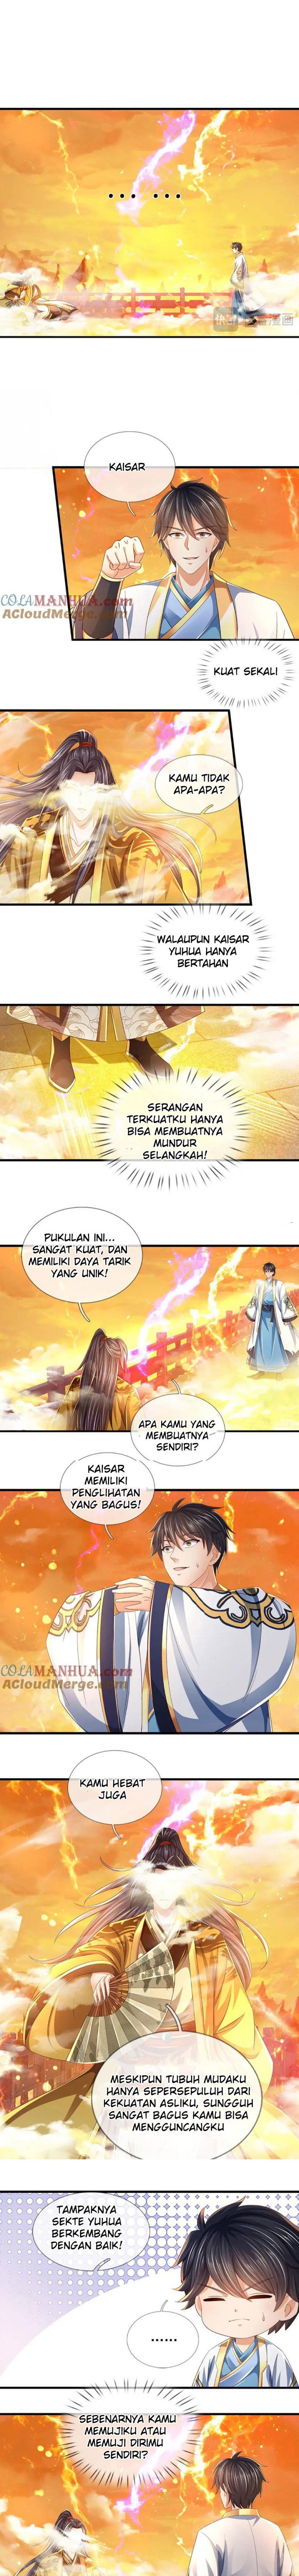 Star Sign In To Supreme Dantian Chapter 256